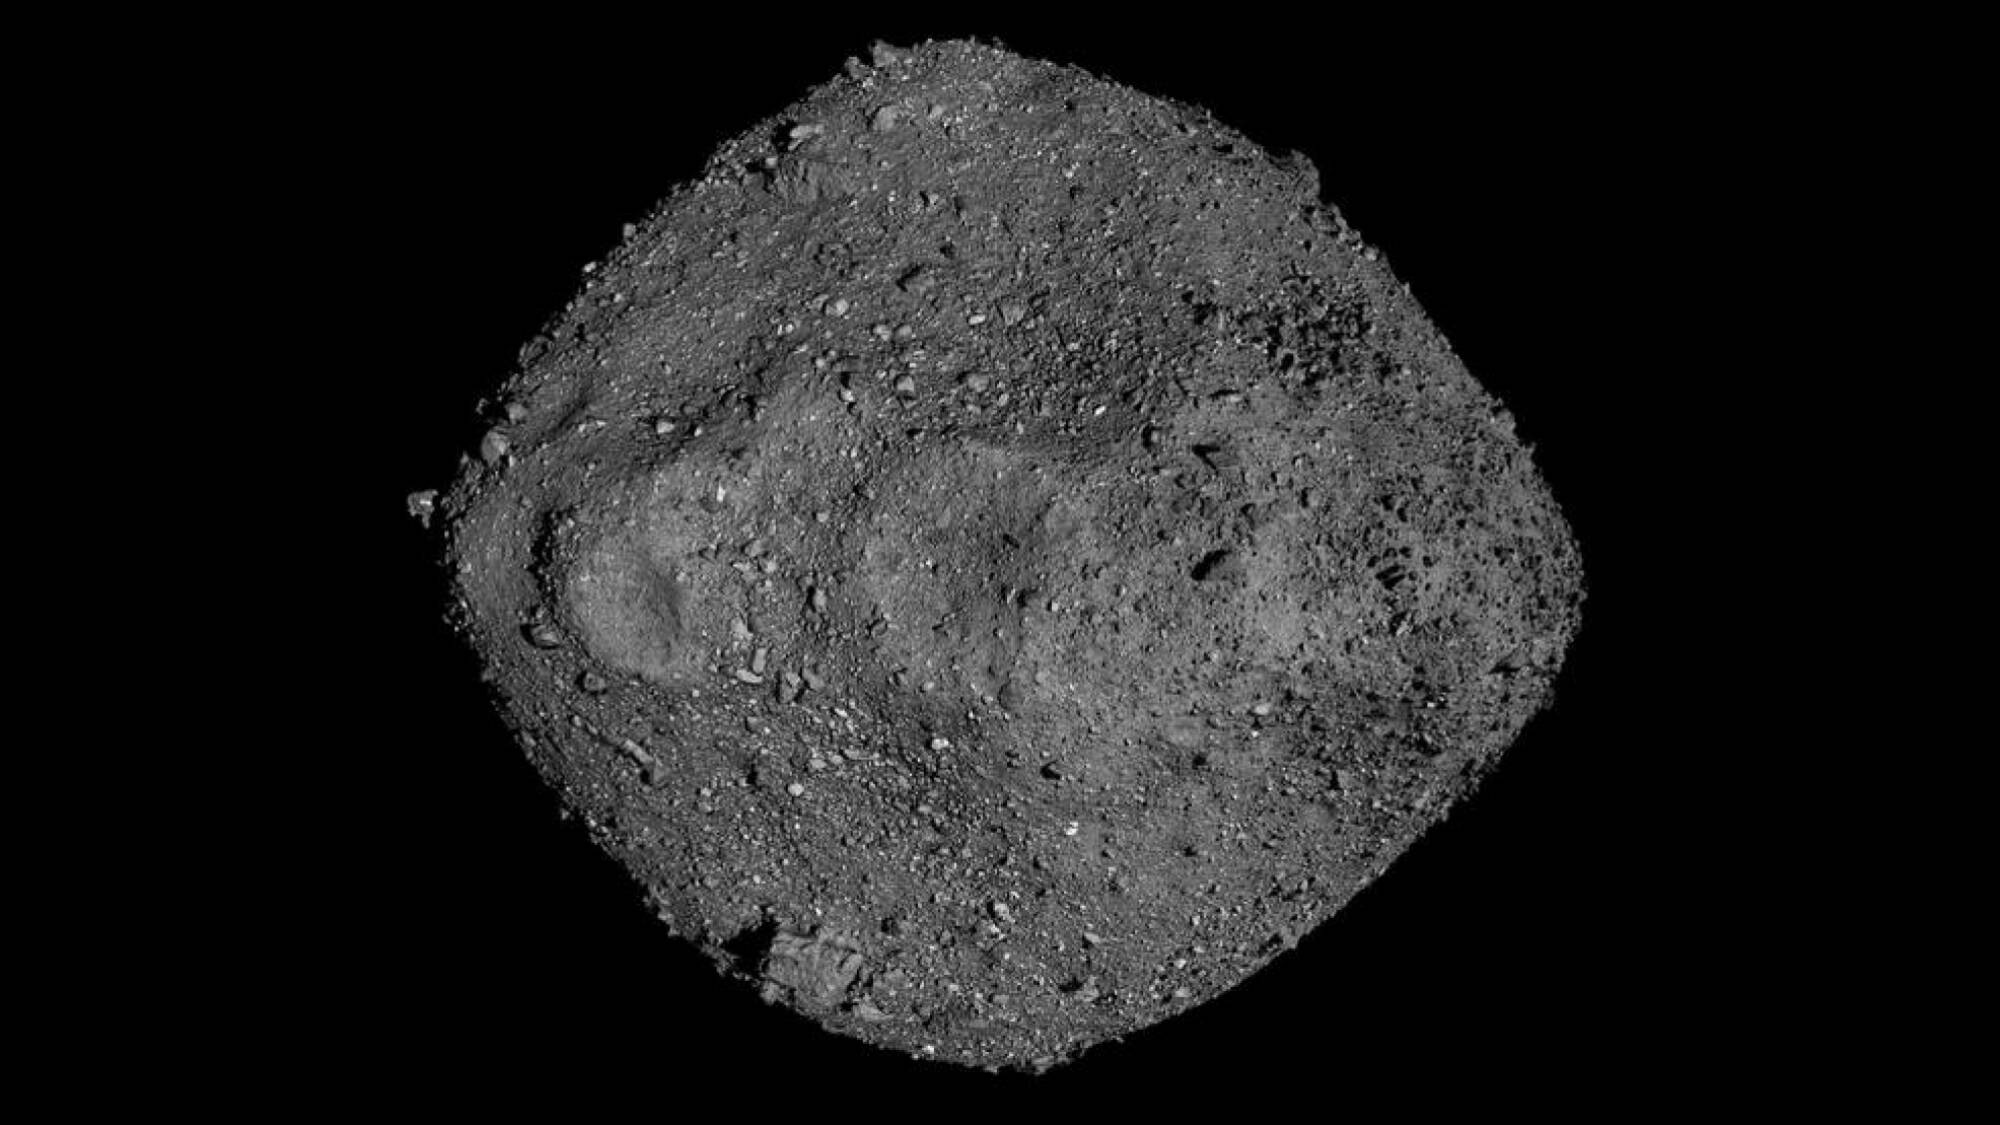 Scientists researching Bennu